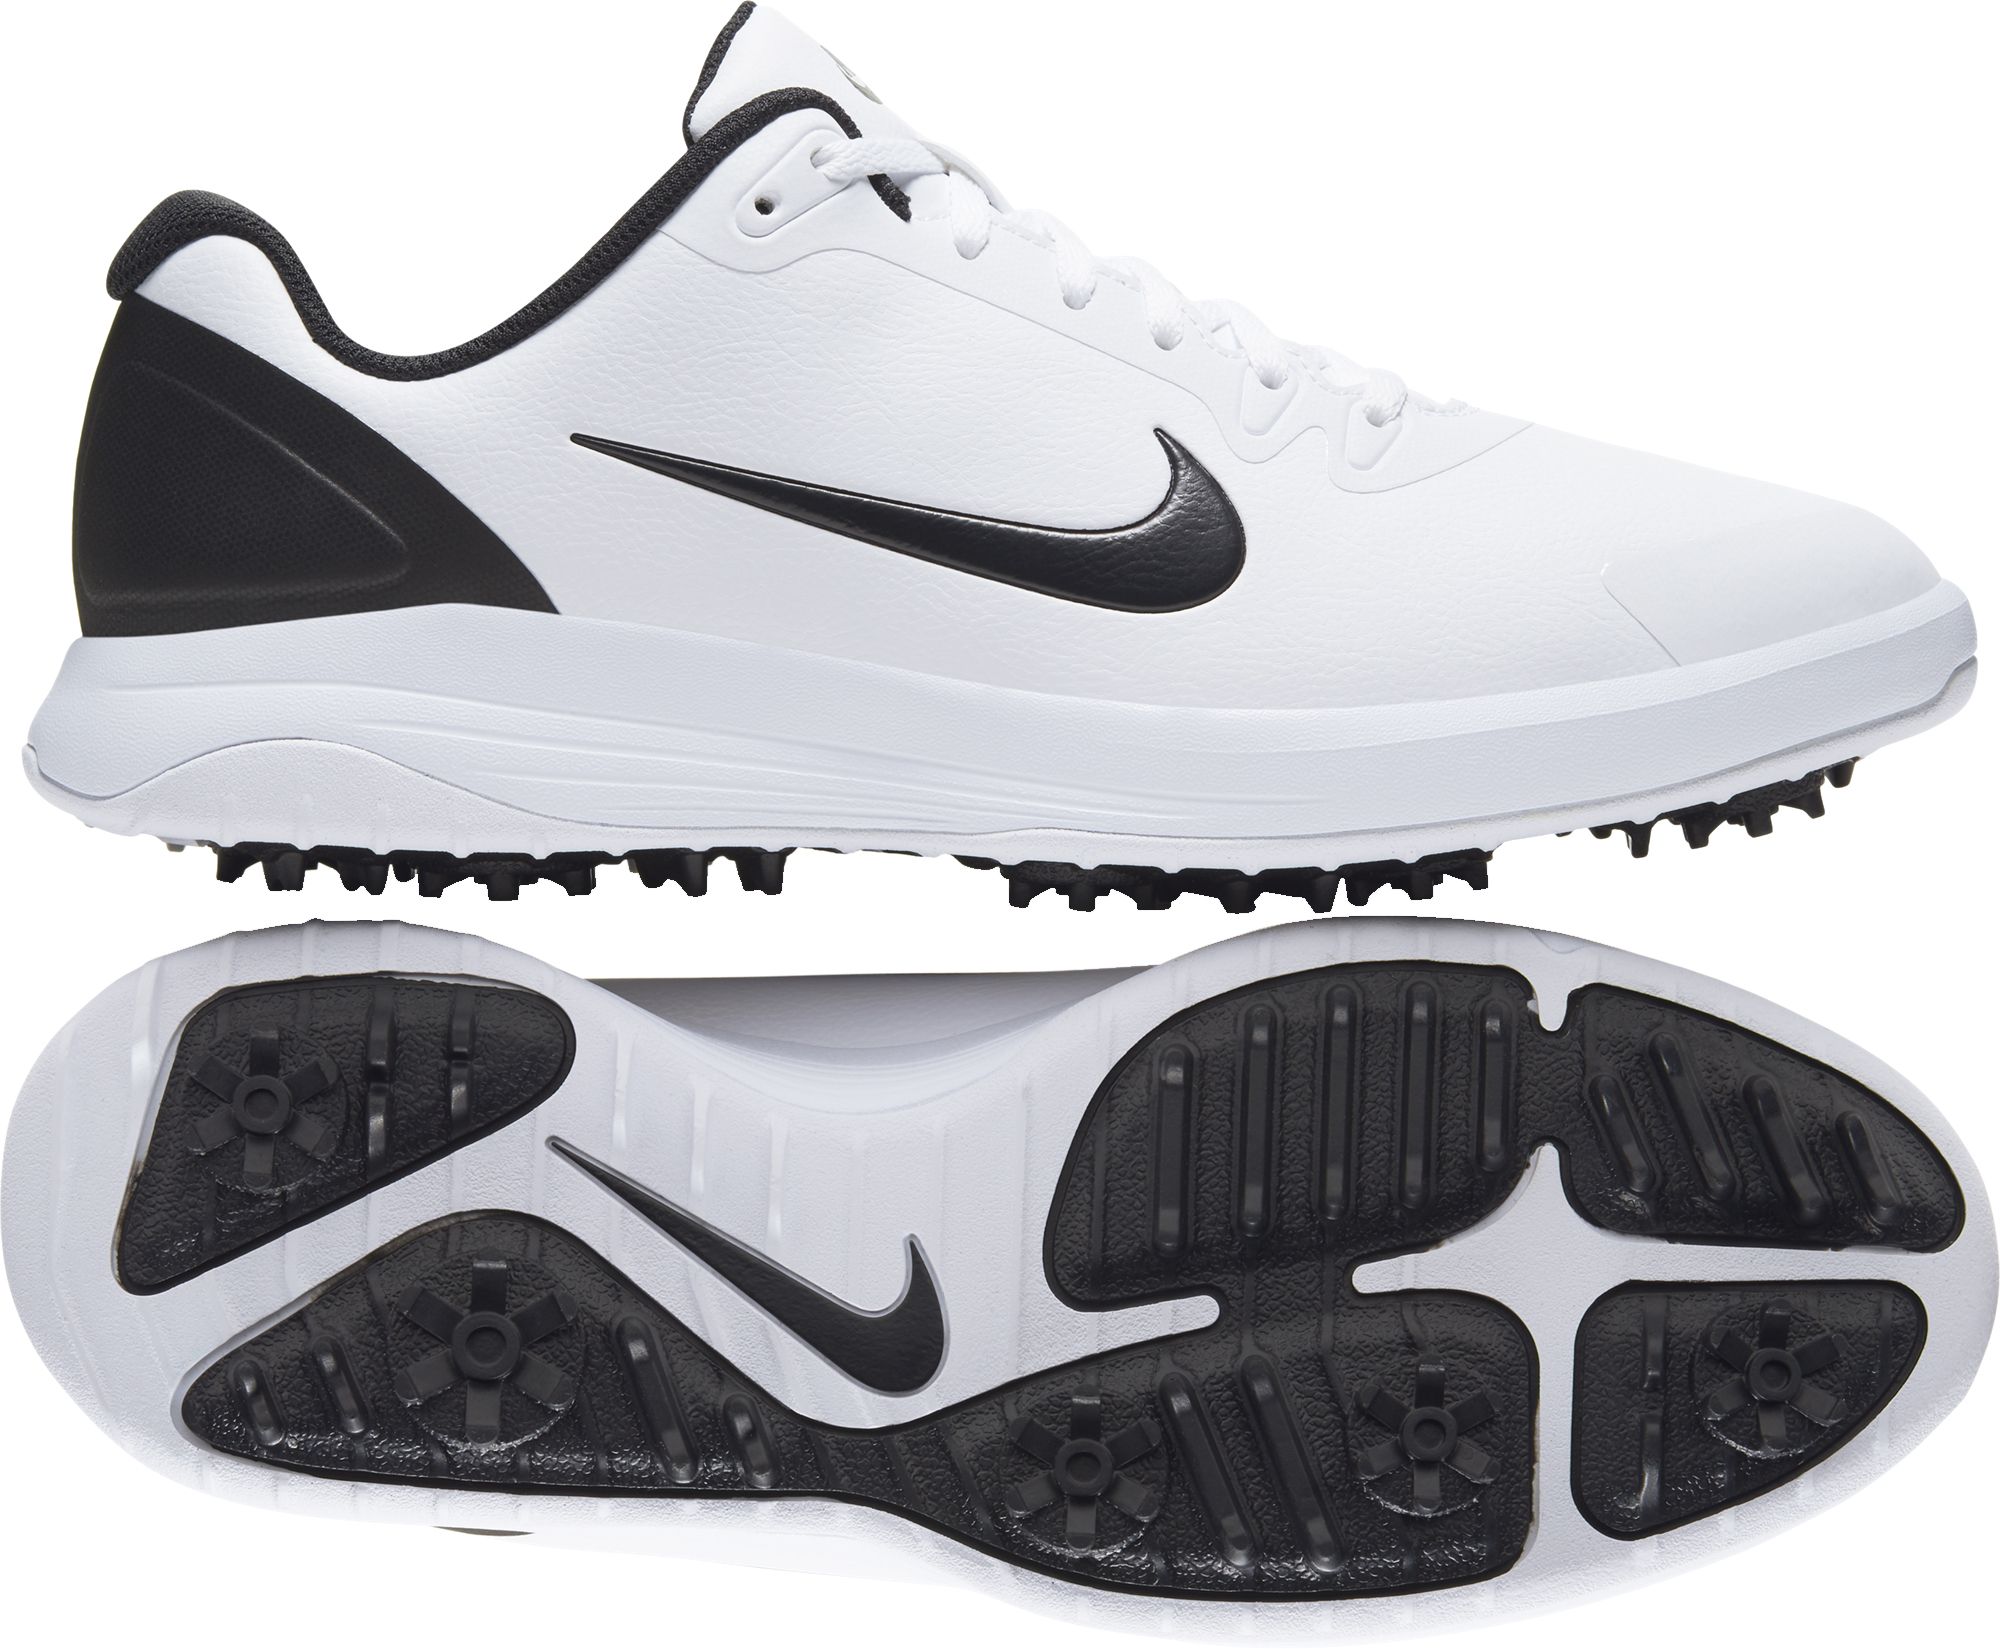 nike infinity g golf shoes